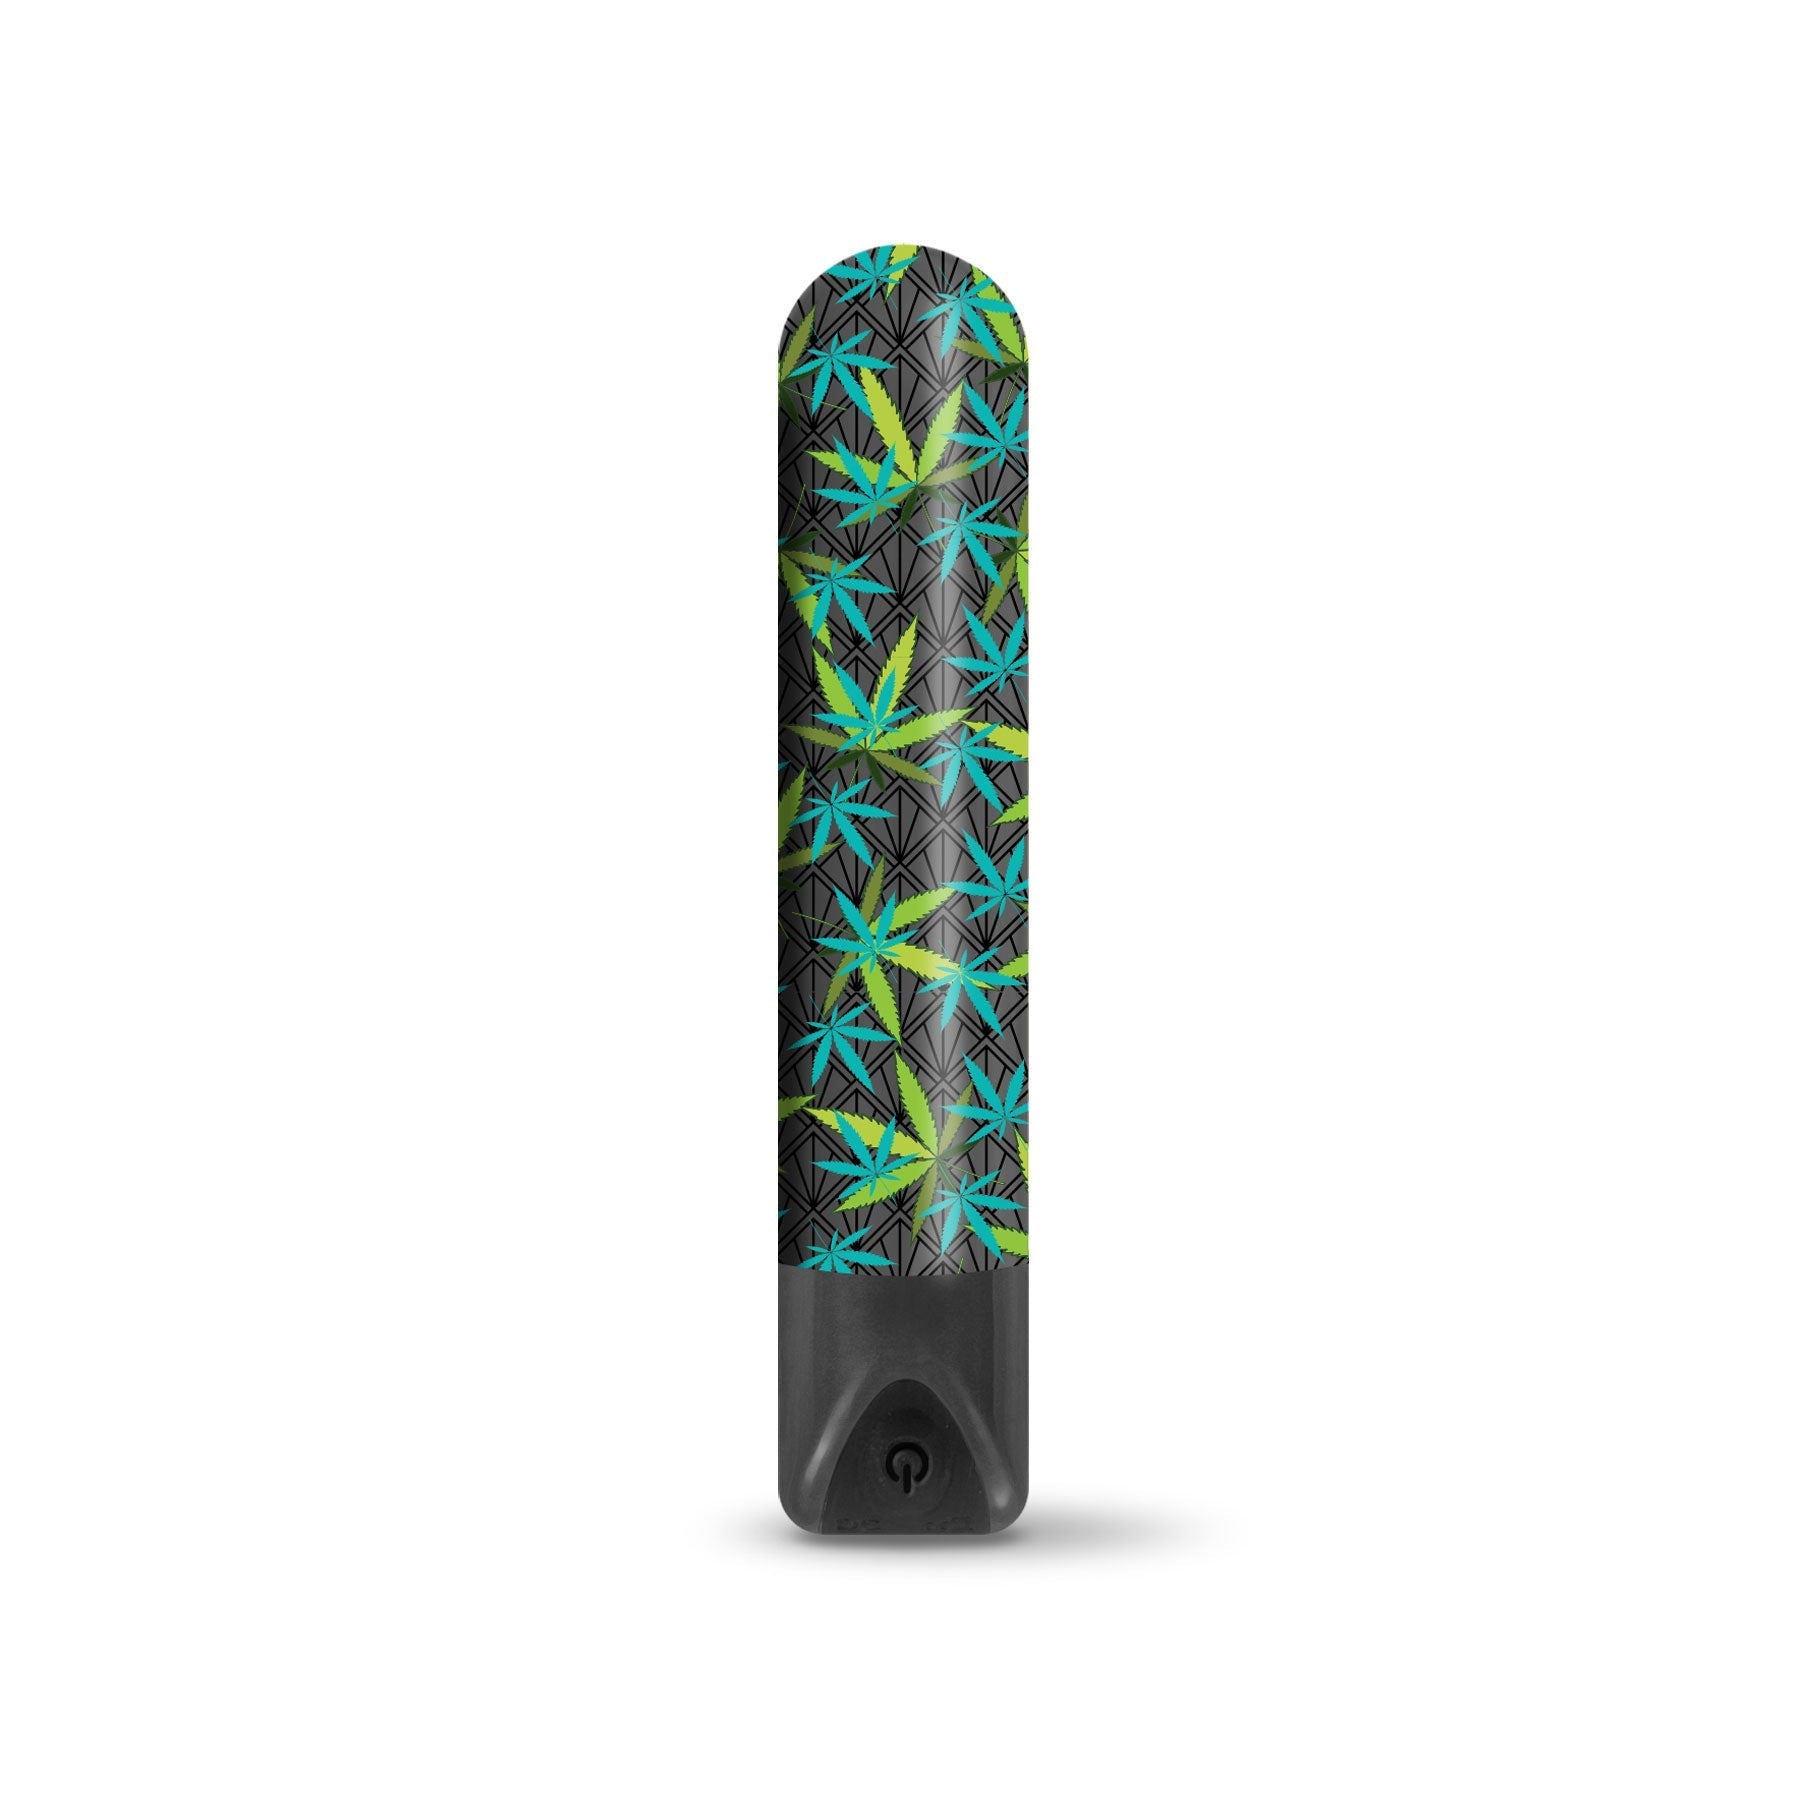 Prints Charming Buzzed Higher Power Rechargeable Bullet Cana Queen